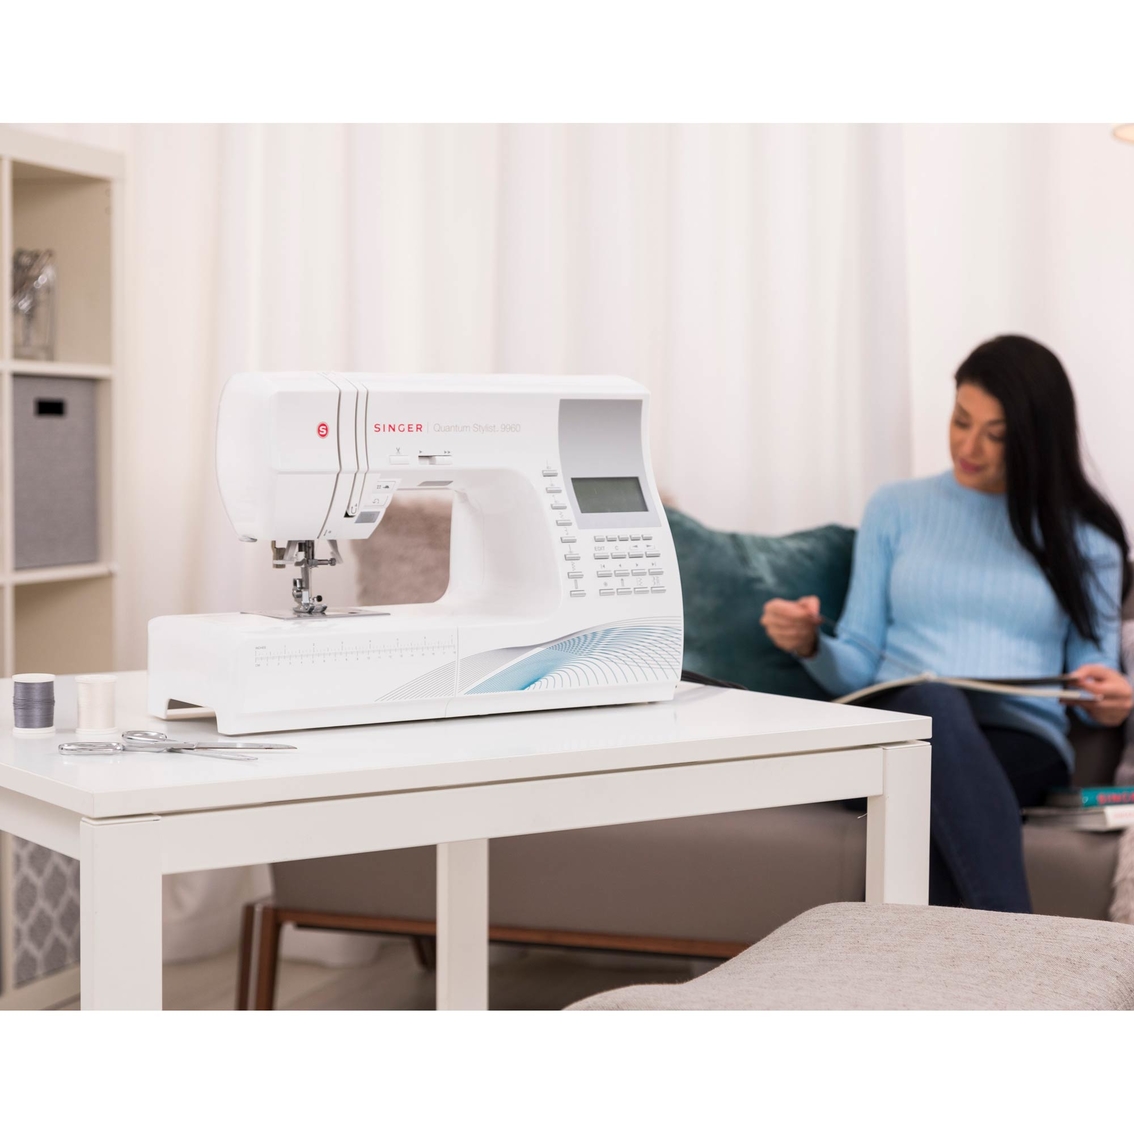 Singer 9960 Quantum Stylist Sewing Machine, Sewing, Household